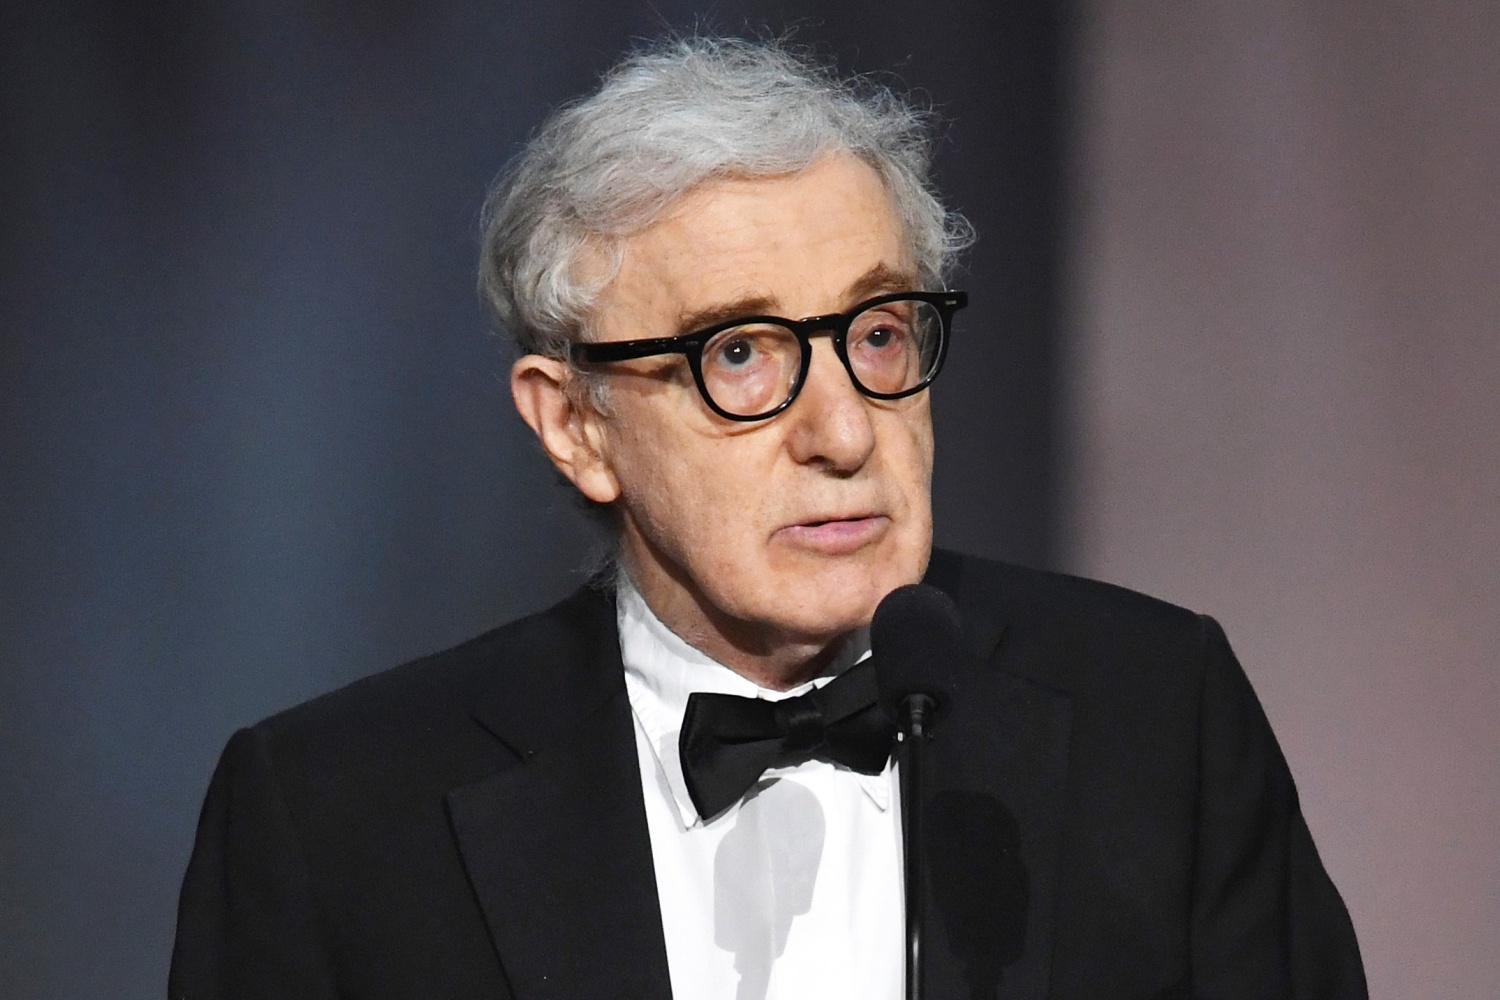 Woody Allen releases his memoir "Apropos of Nothing" on March 23